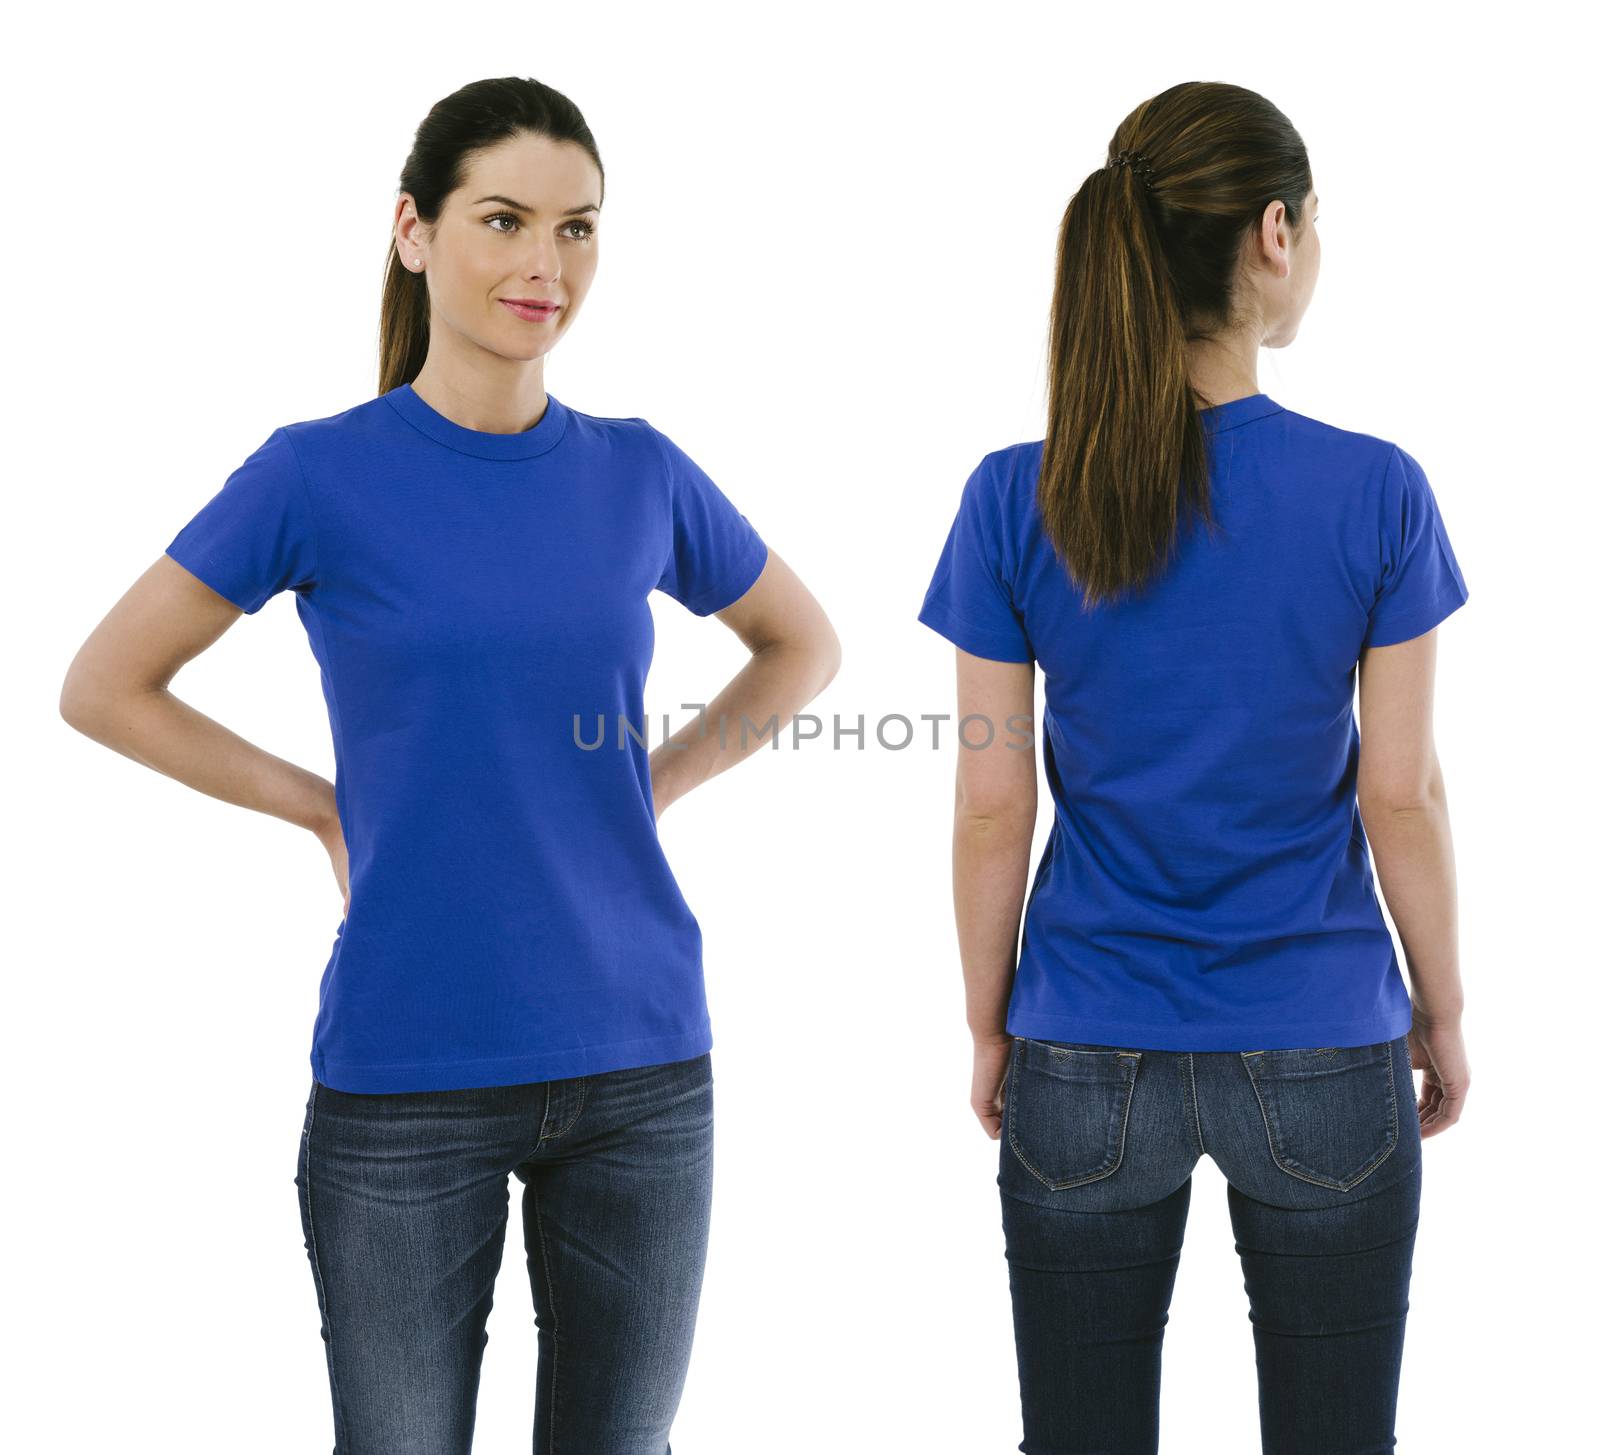 Photo of a beautiful brunette woman posing with a blank blue t-shirt, ready for your artwork or design.